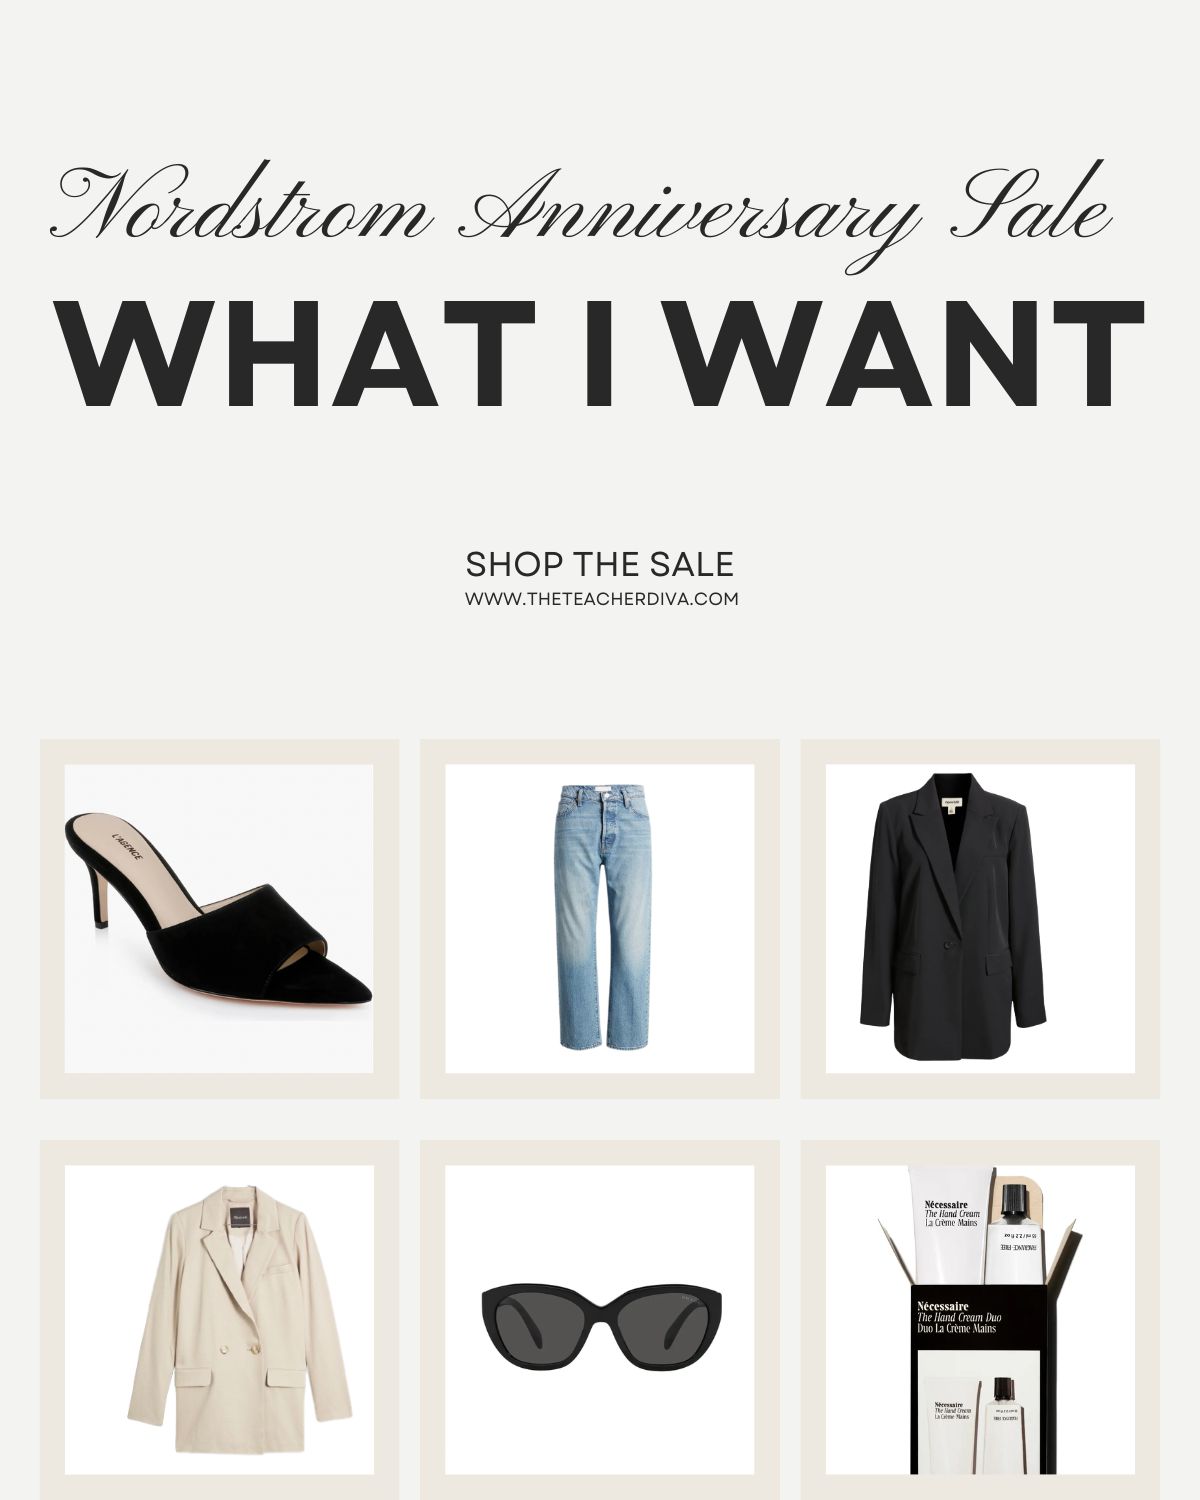 THE BEST BASICS IN THE NORDSTROM ANNIVERSARY SALE THIS YEAR